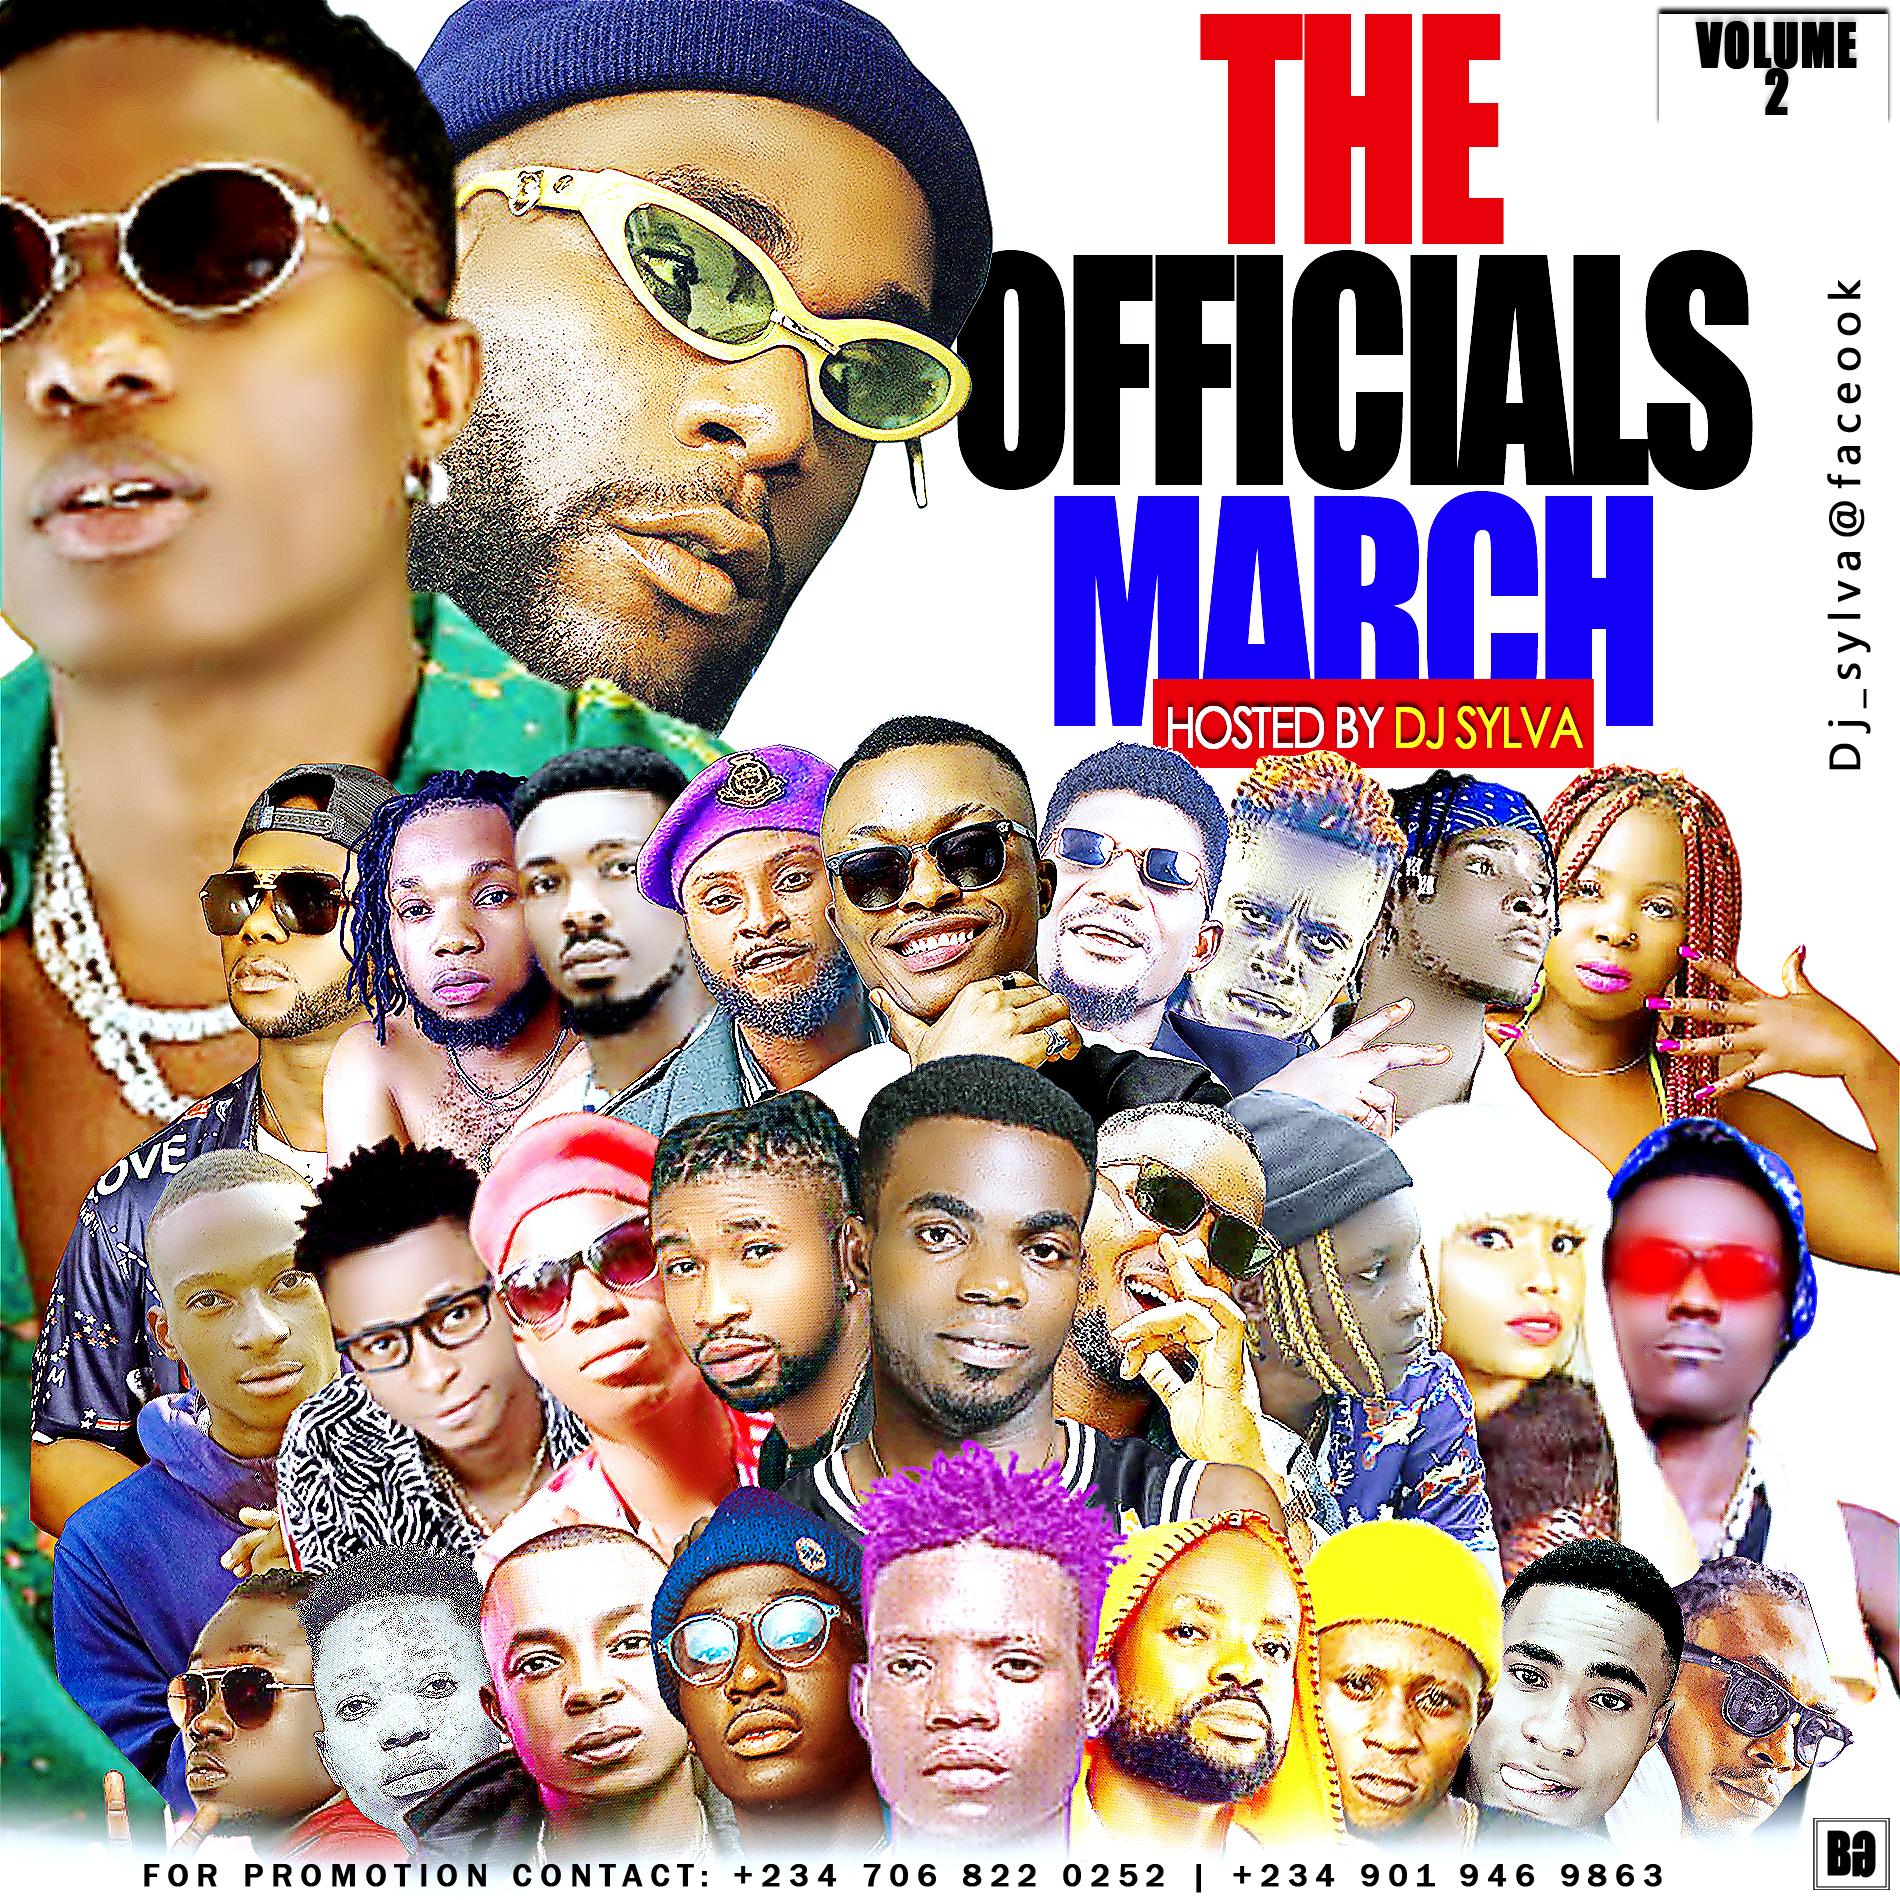 DOWNLOAD MIXTAPE: THE OFFICIALS MARCH HOSTED BY DJ SYLVA